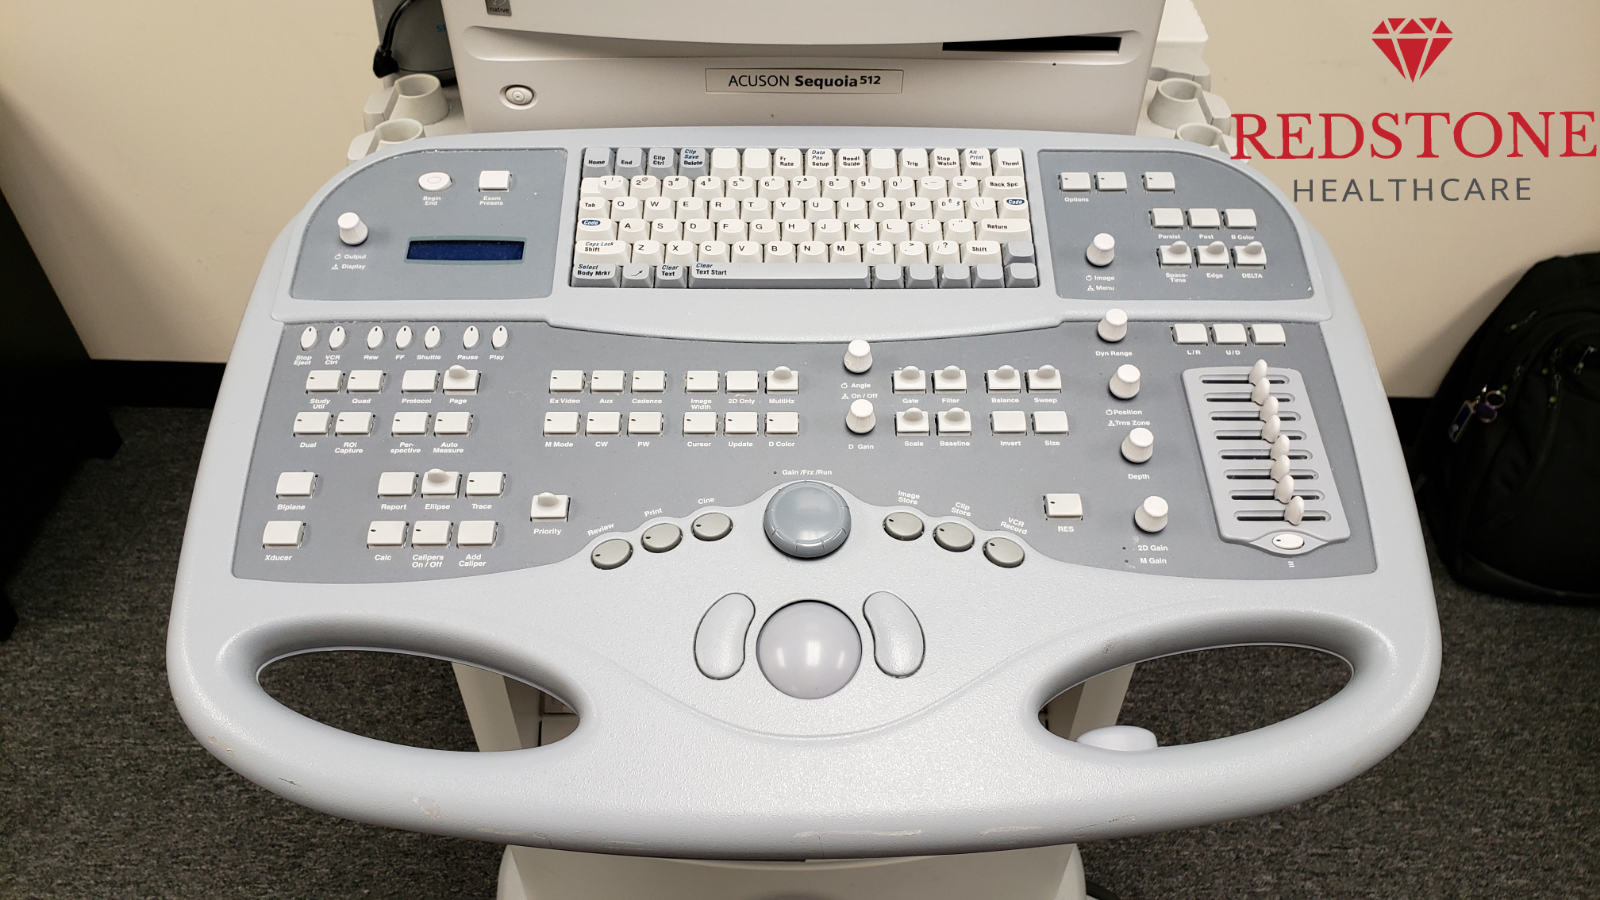 Siemens Acuson Sequoia 512 Ultrasound System Till End of Year $200 Less!